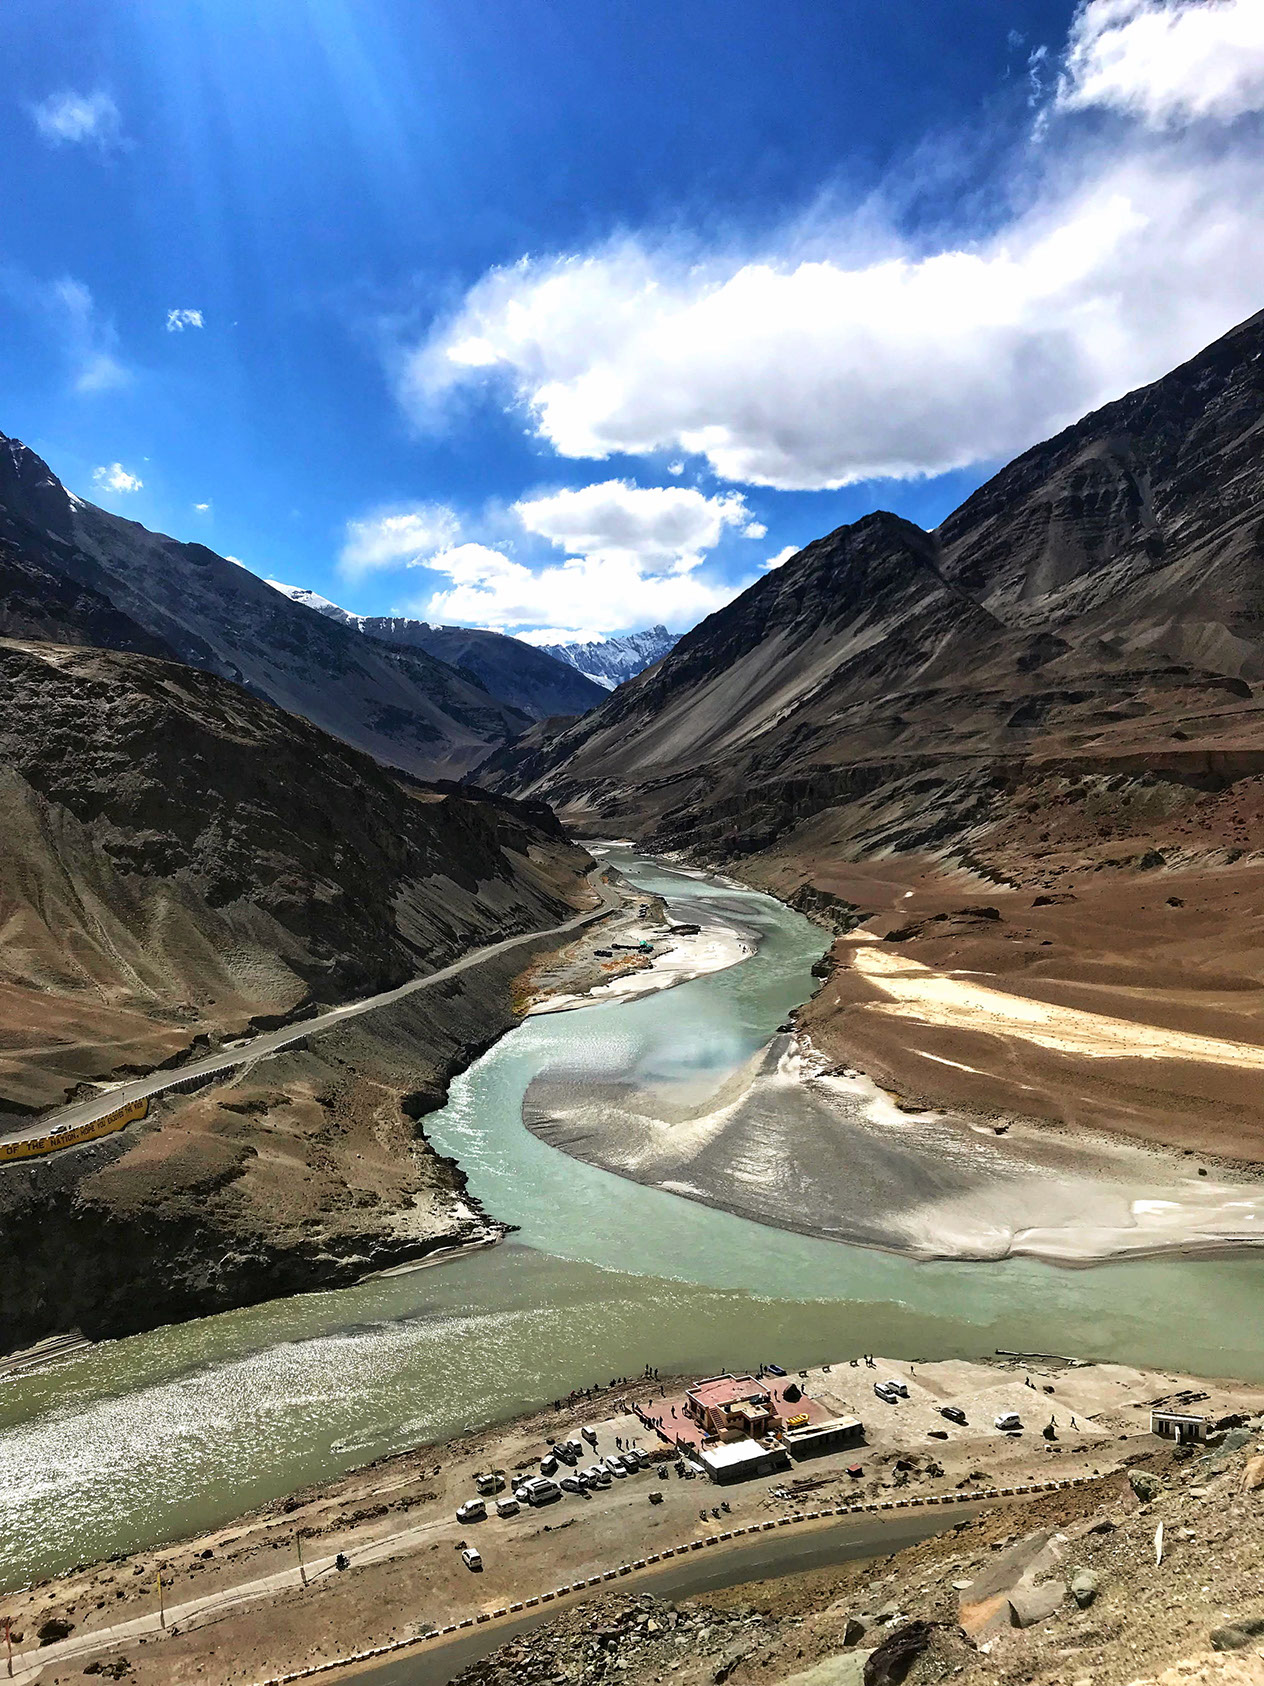 Picturesque play of colors at the confluence of Zanskar and Indus Rivers in Ladakh